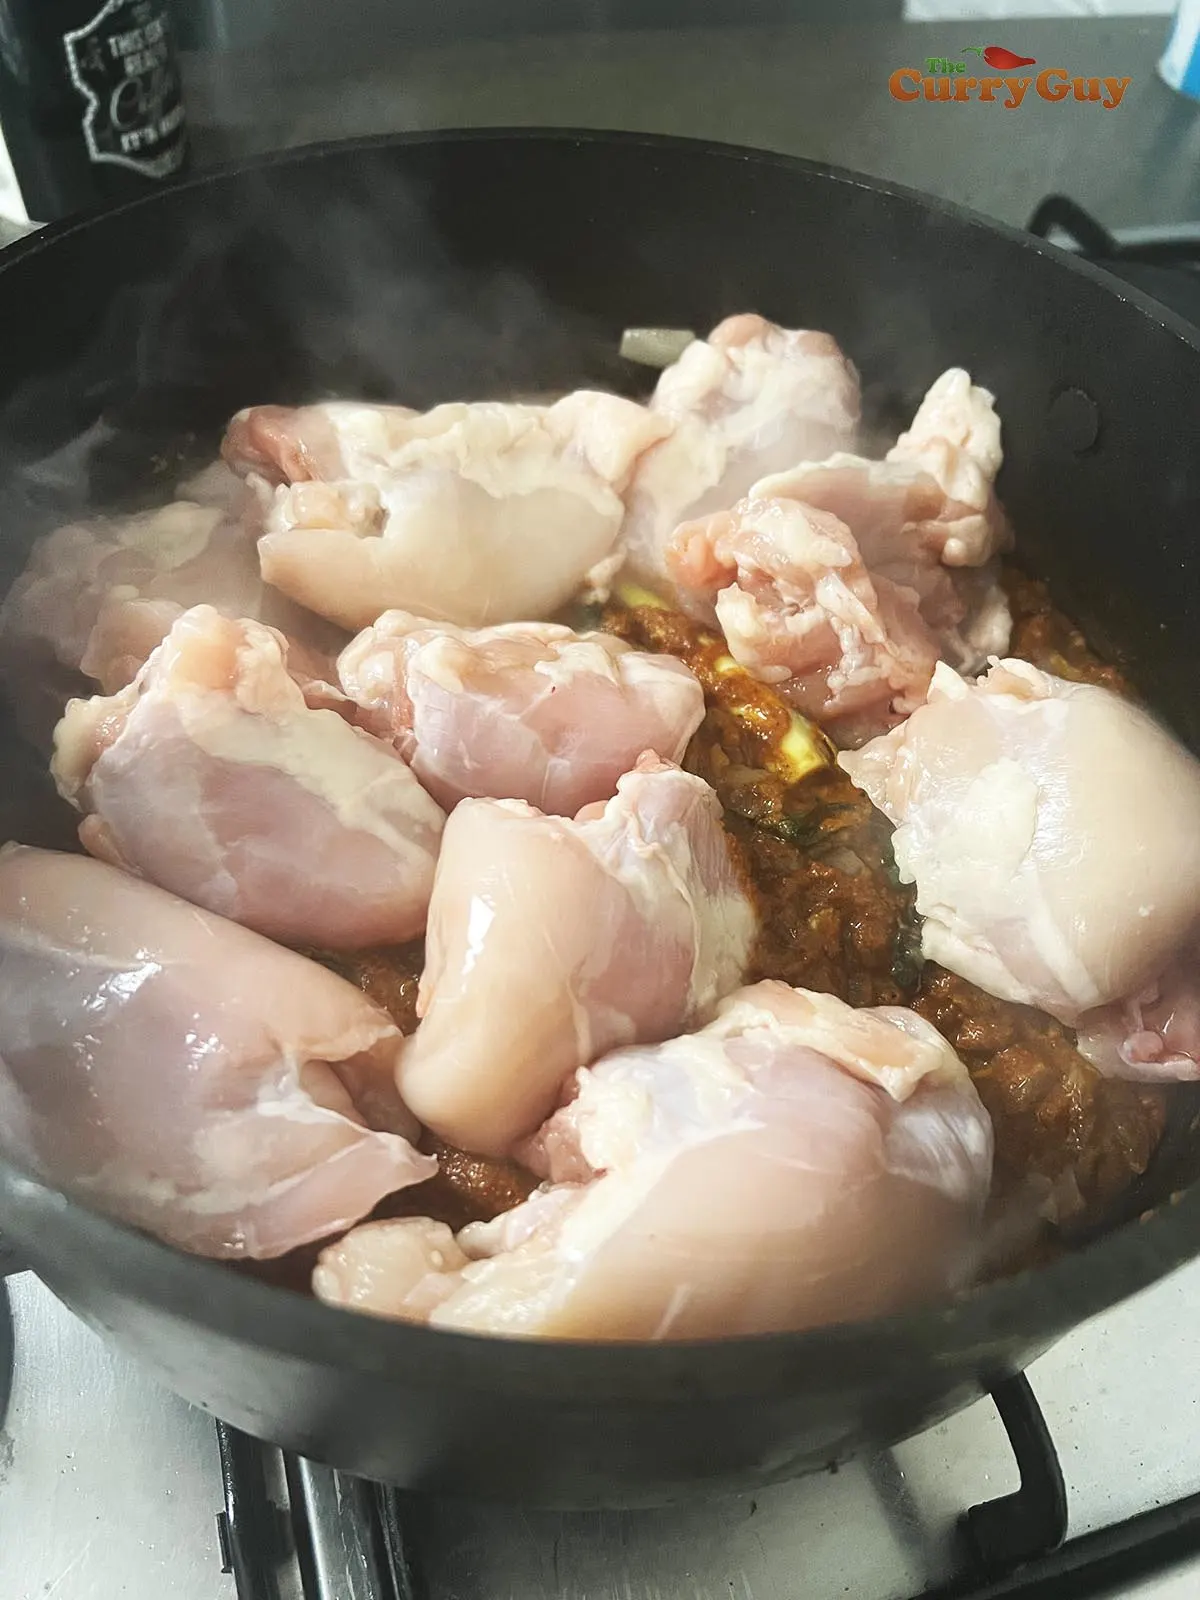 Adding the spice pastes and chicken to the pan.